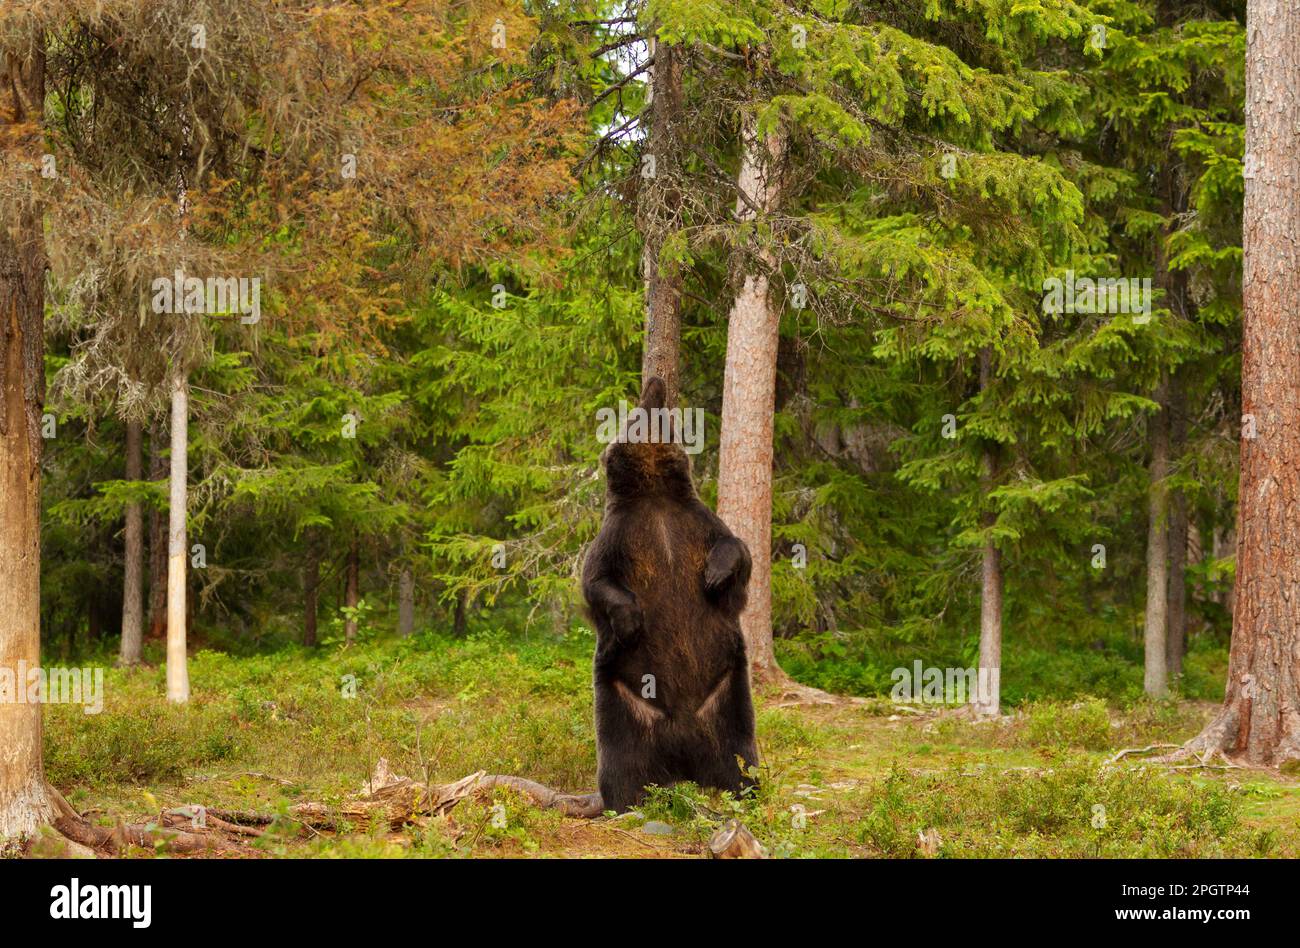 Close up of Eurasian Brown bear standing on its rear legs and scratching back against tree, Finland. Stock Photo